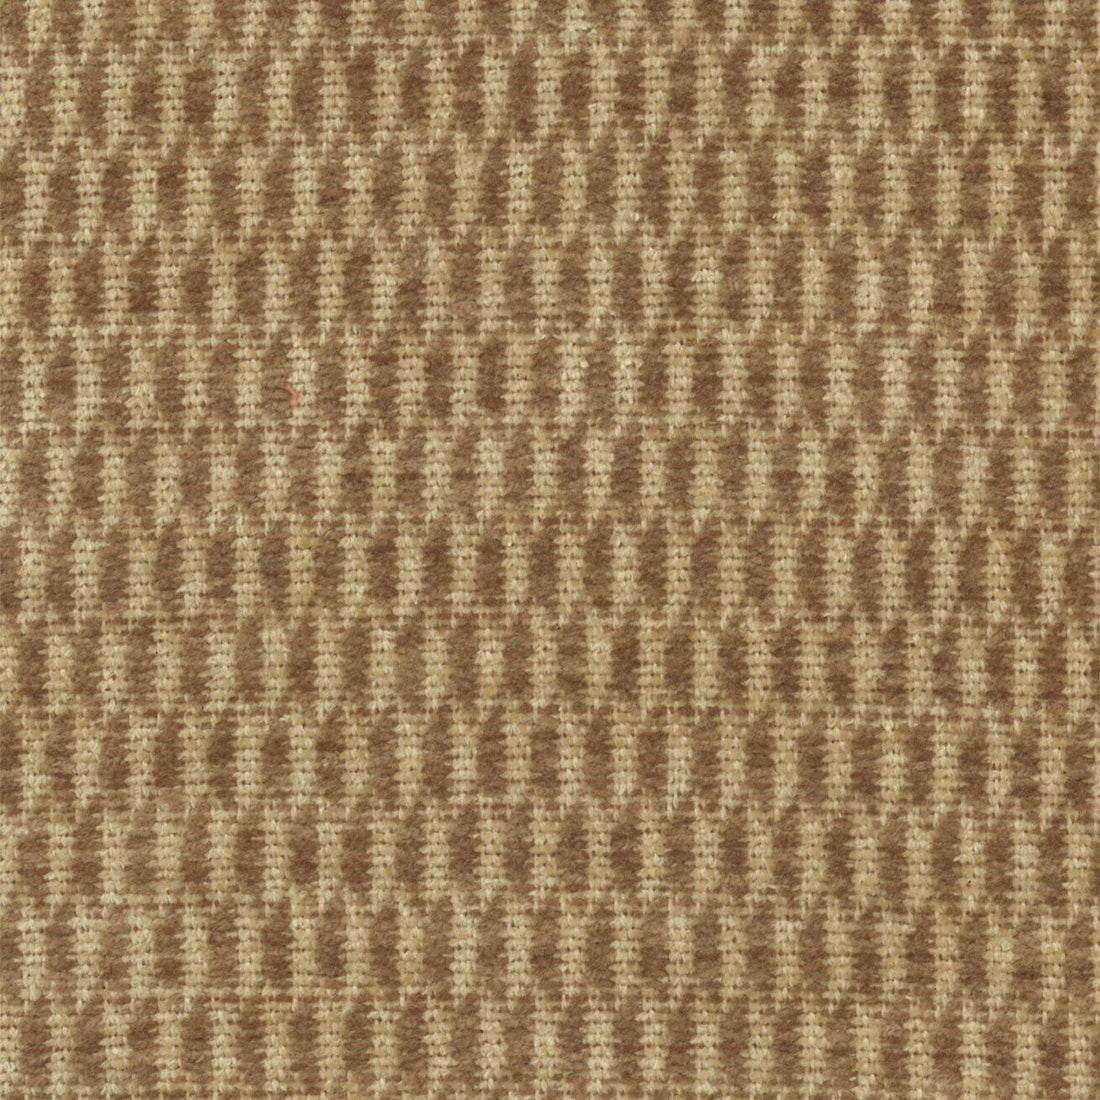 Ridgway Chenille fabric in chamois color - pattern number PW 00014102 - by Scalamandre in the Old World Weavers collection